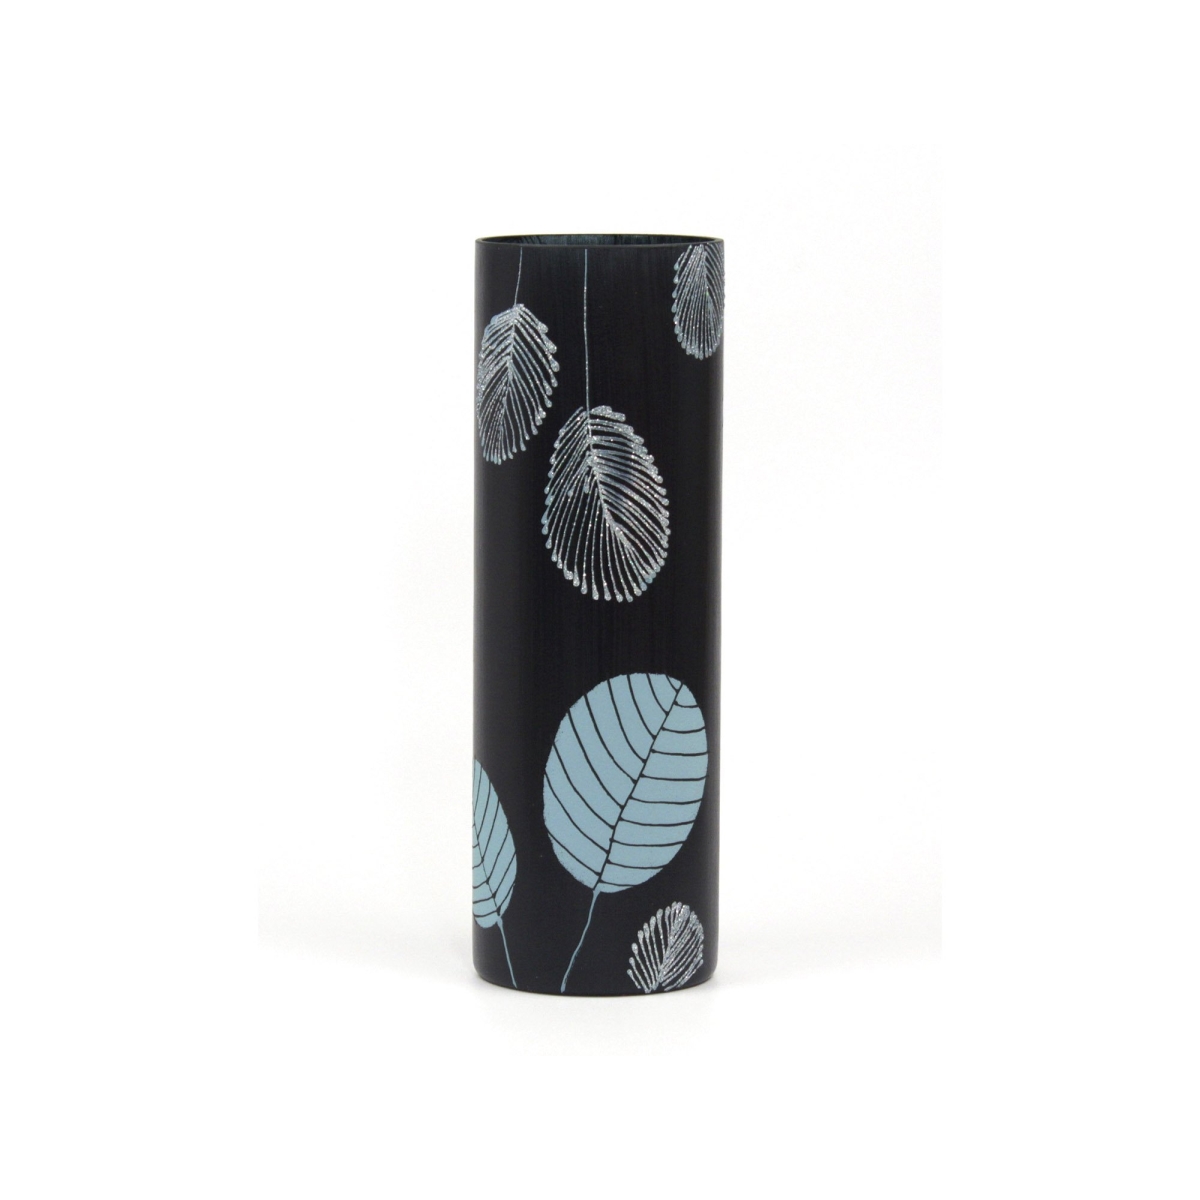 7856-300-sh104.6 12 in. Hand Painted Cylinder Art Glass Table Vase for Flowers, Black with Blue Leaf Print -  B2 Studio, 7856/300/sh104.6